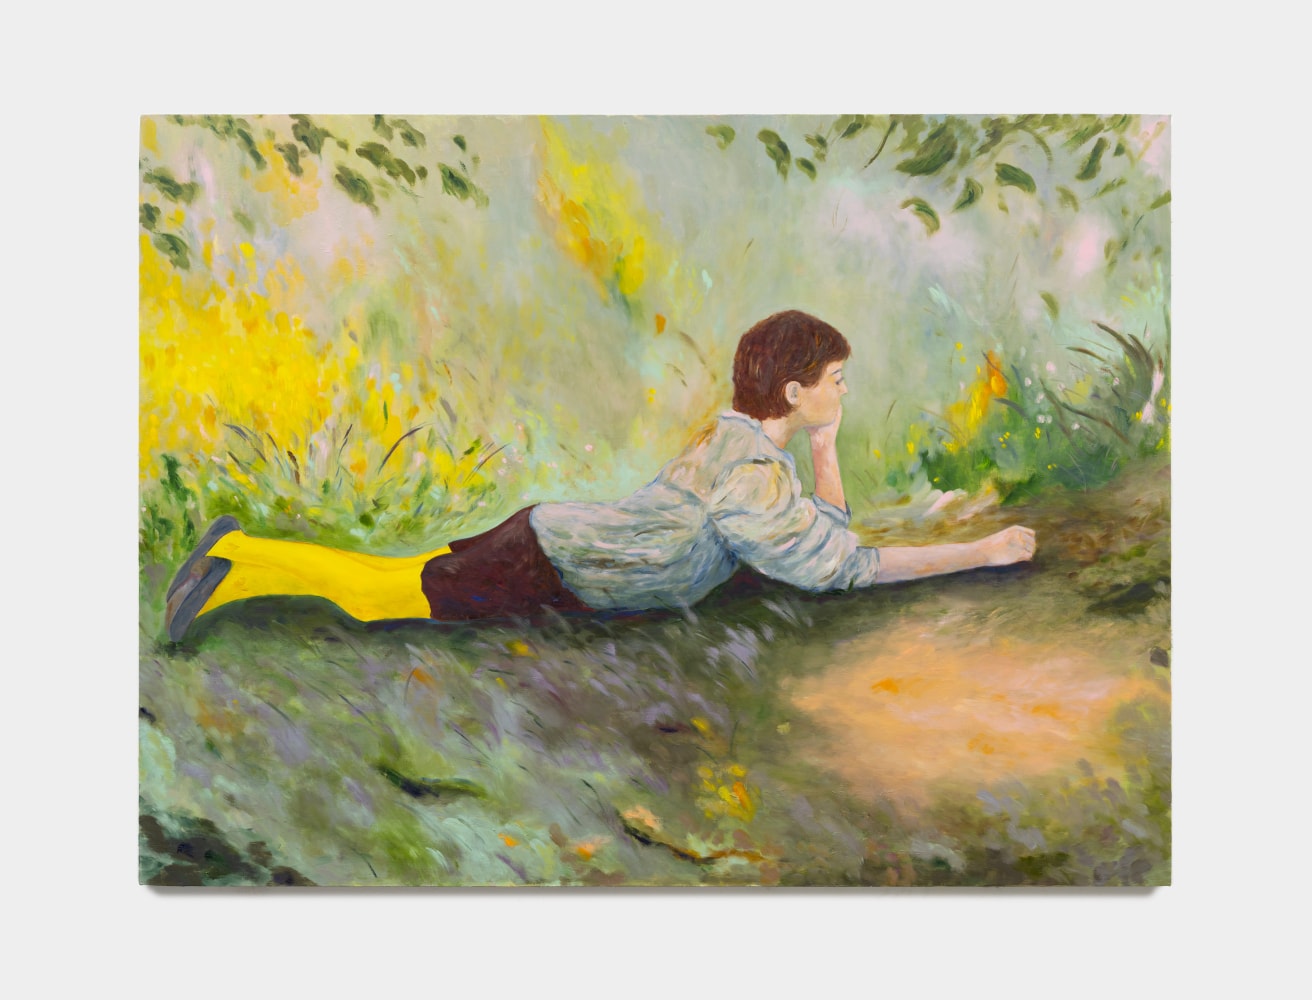 A painting of a young person laying in a field of yellow flowers and green grass.